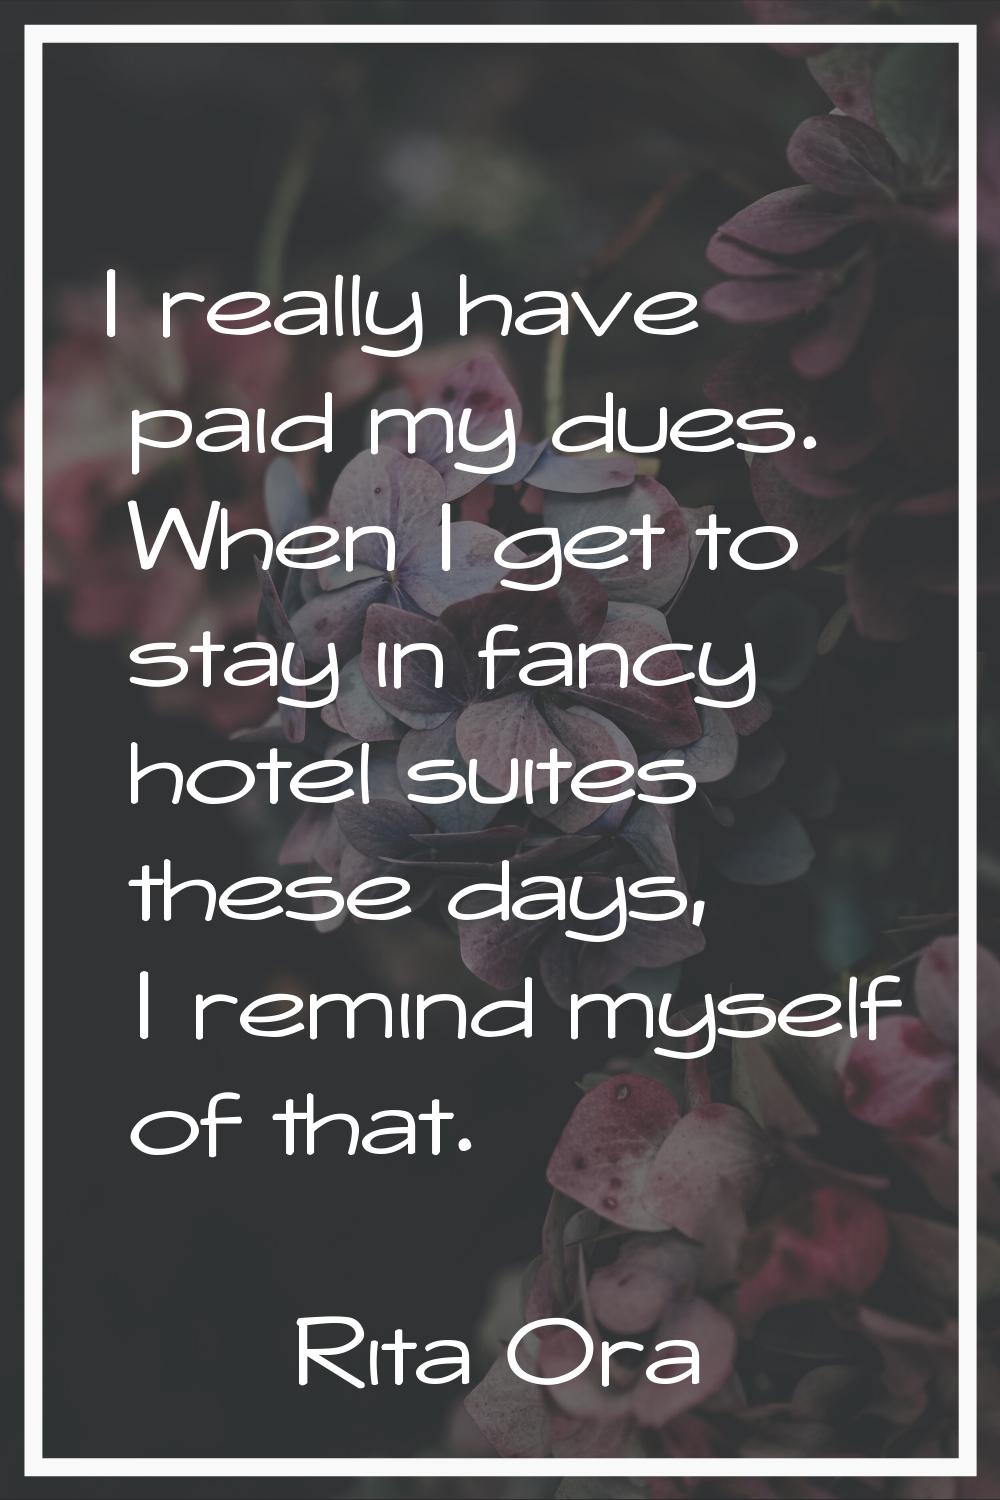 I really have paid my dues. When I get to stay in fancy hotel suites these days, I remind myself of